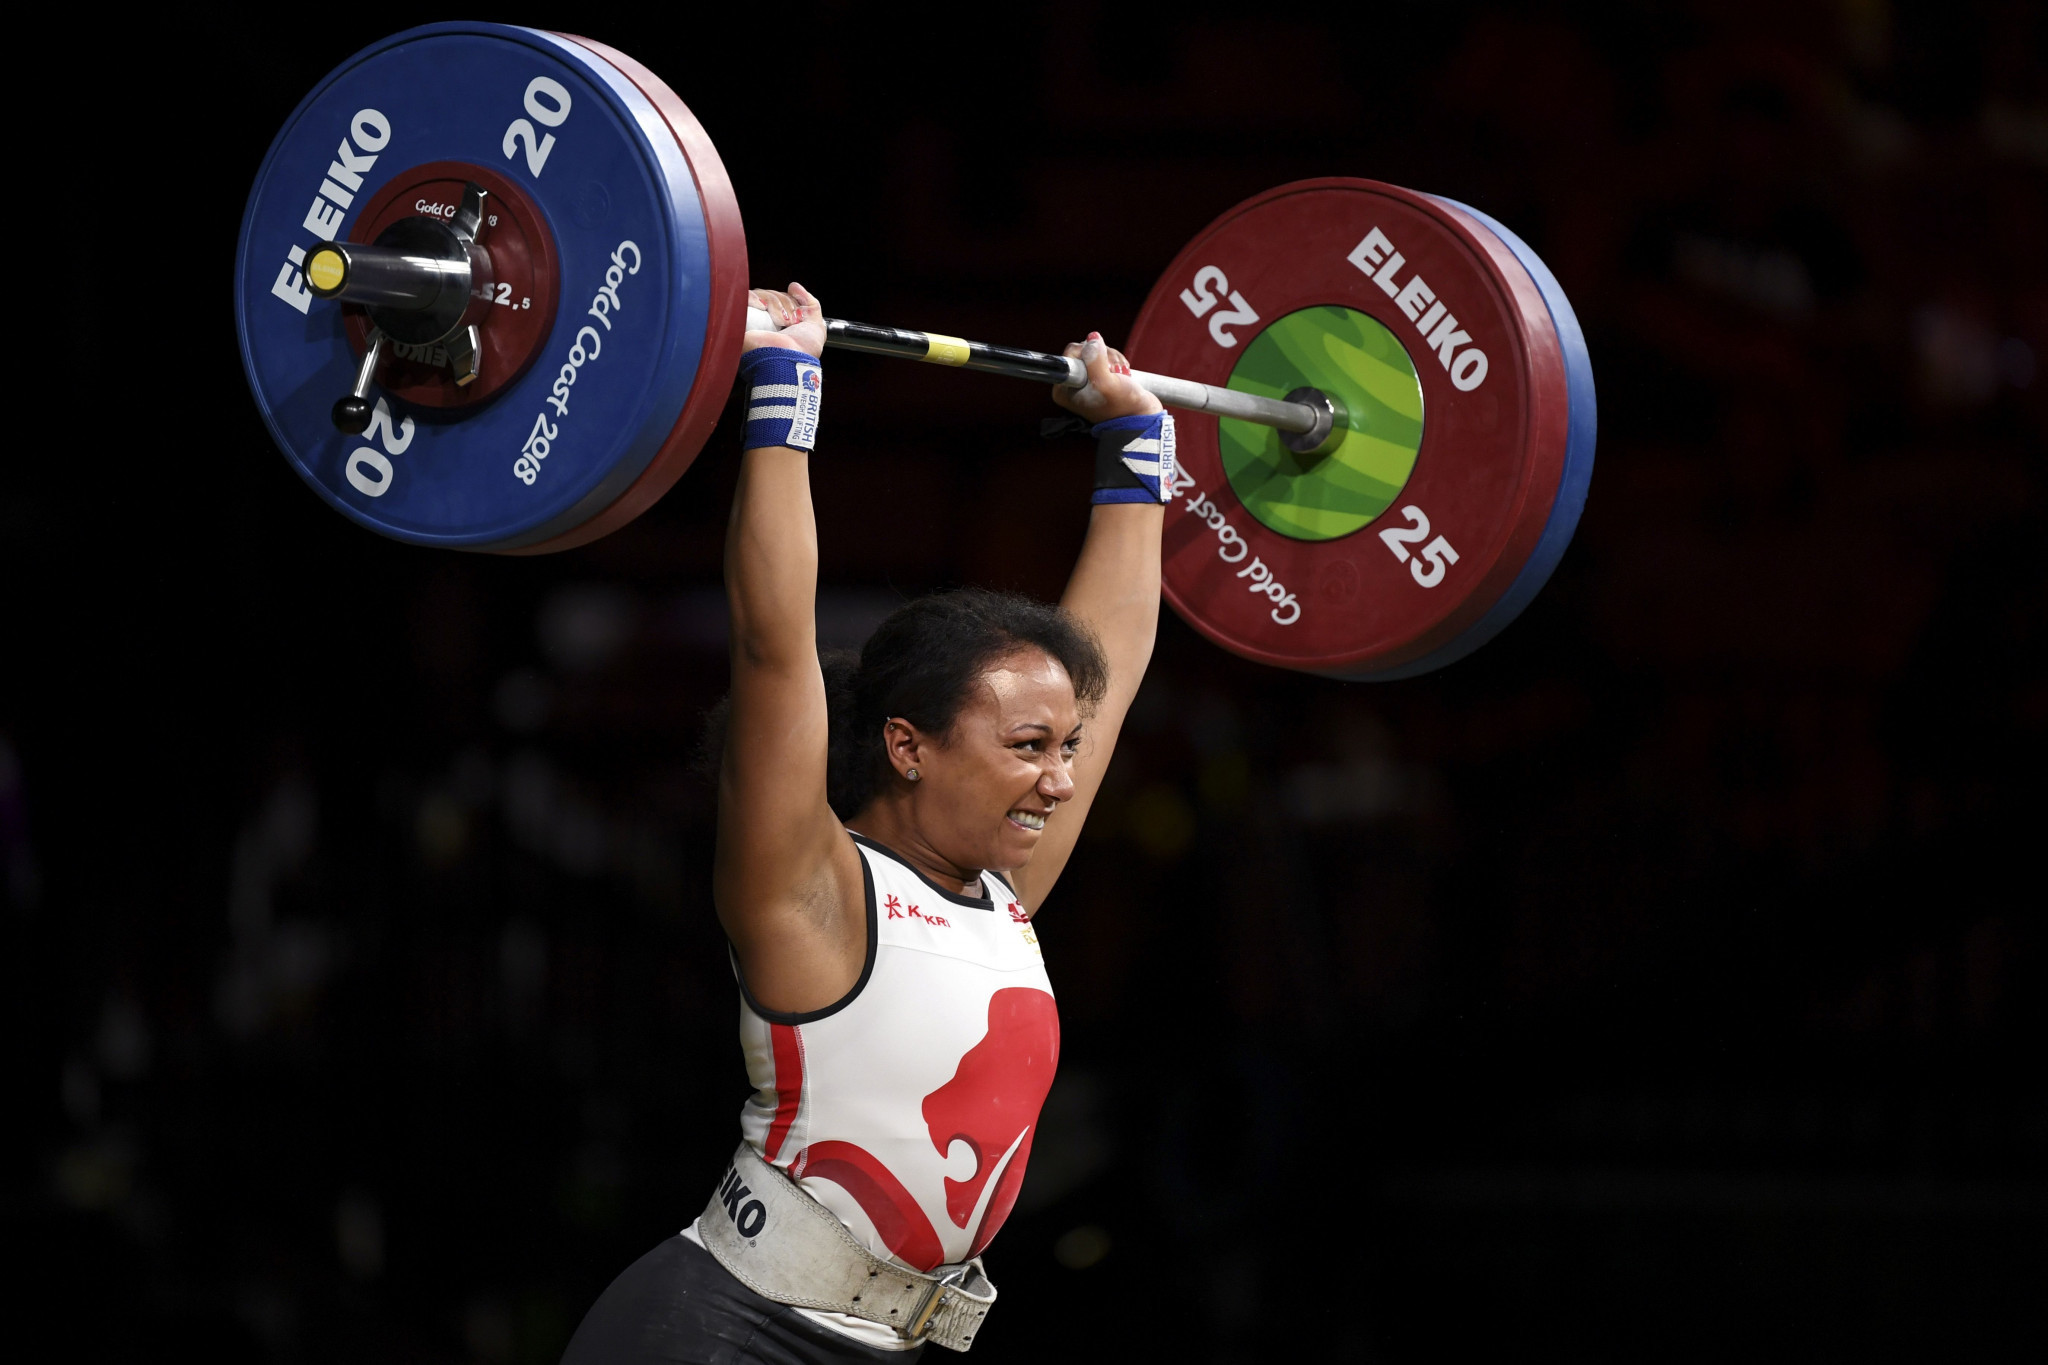 British weightlifting hopes could now rest with the likes of Zoe Smith ©Getty Images